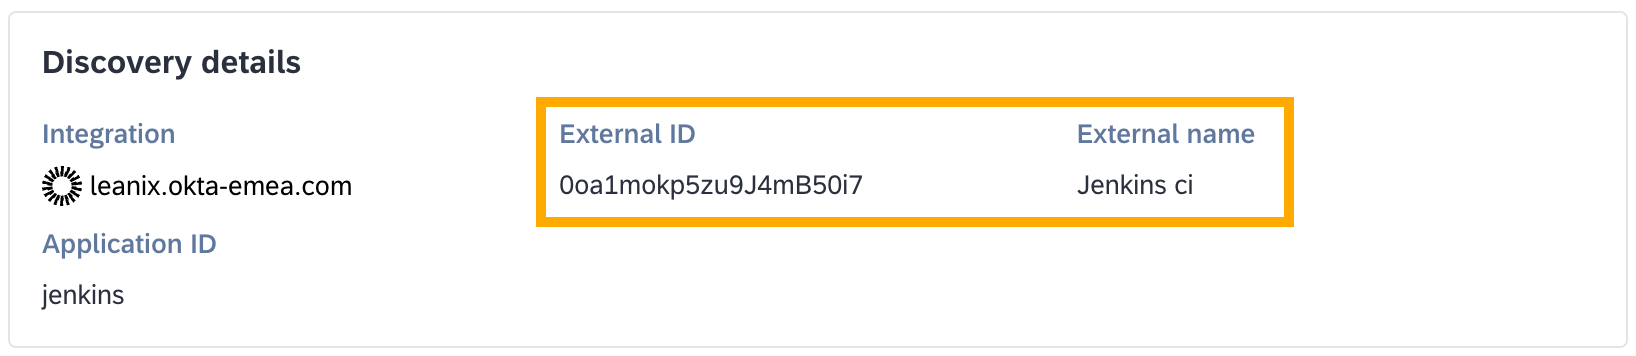 Discovered SaaS Item’s Detail Showing External ID